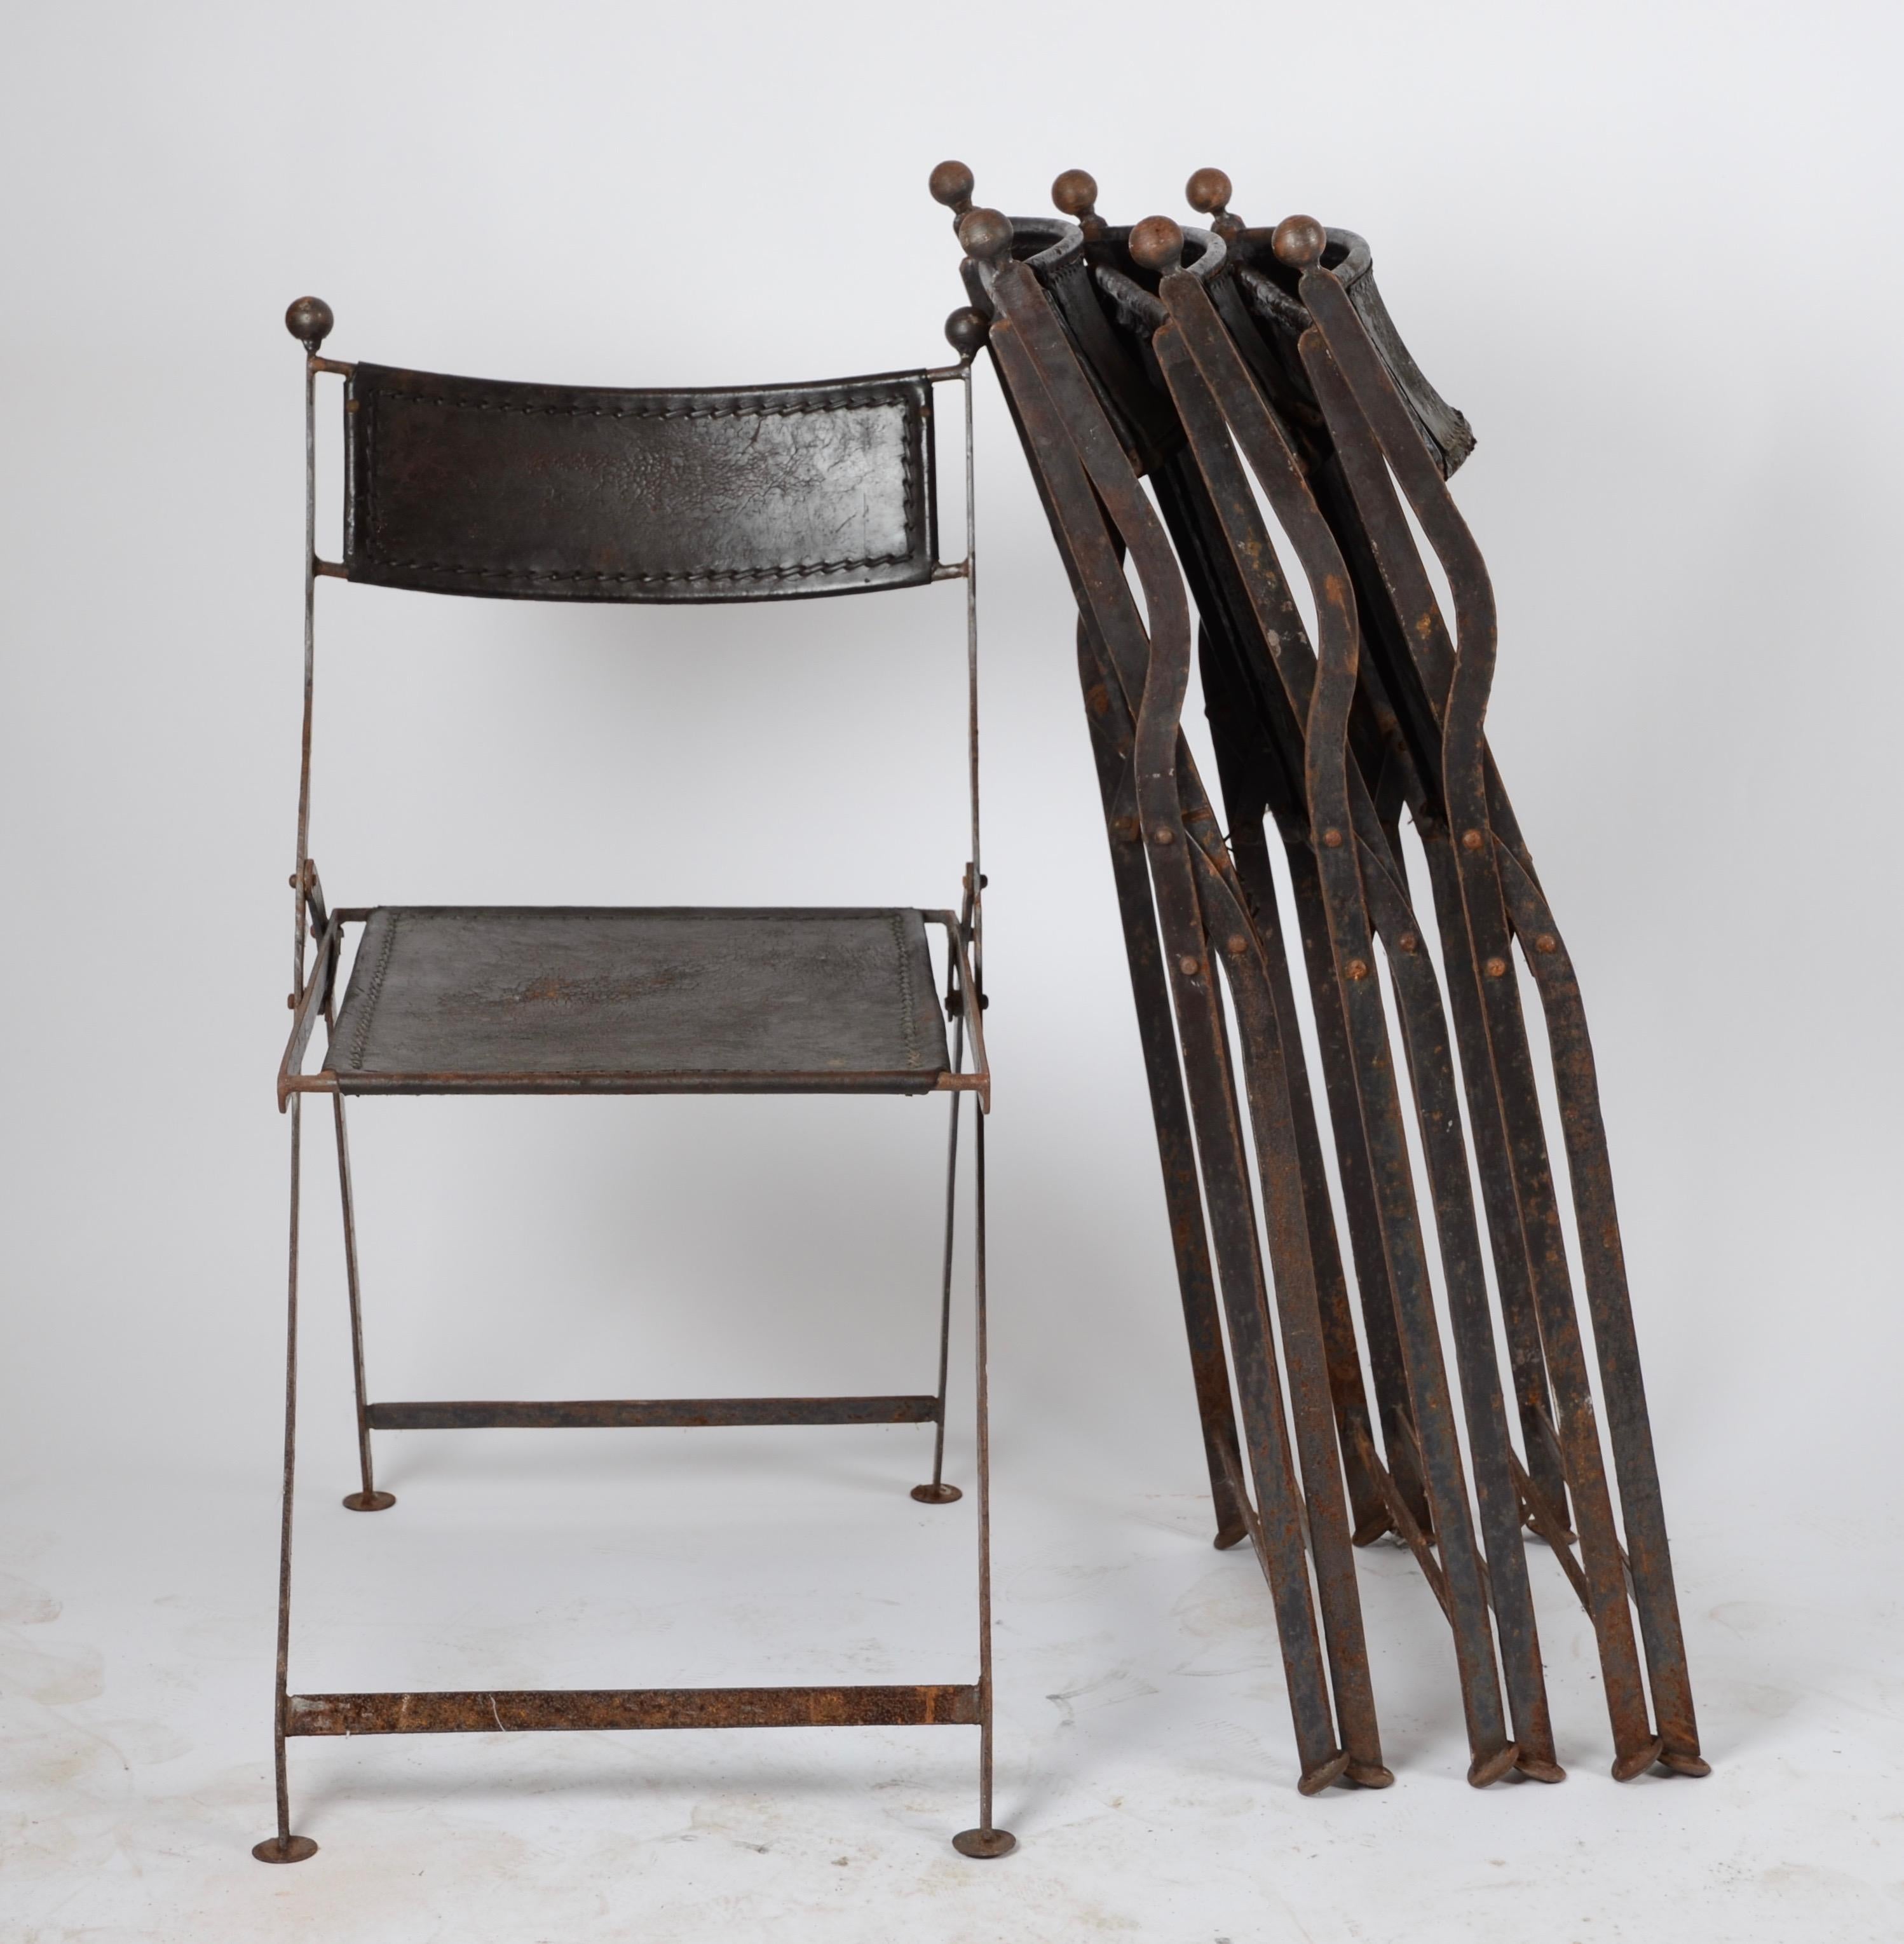 A set of four folding chairs in leather and iron, France, 1920s-1930s.